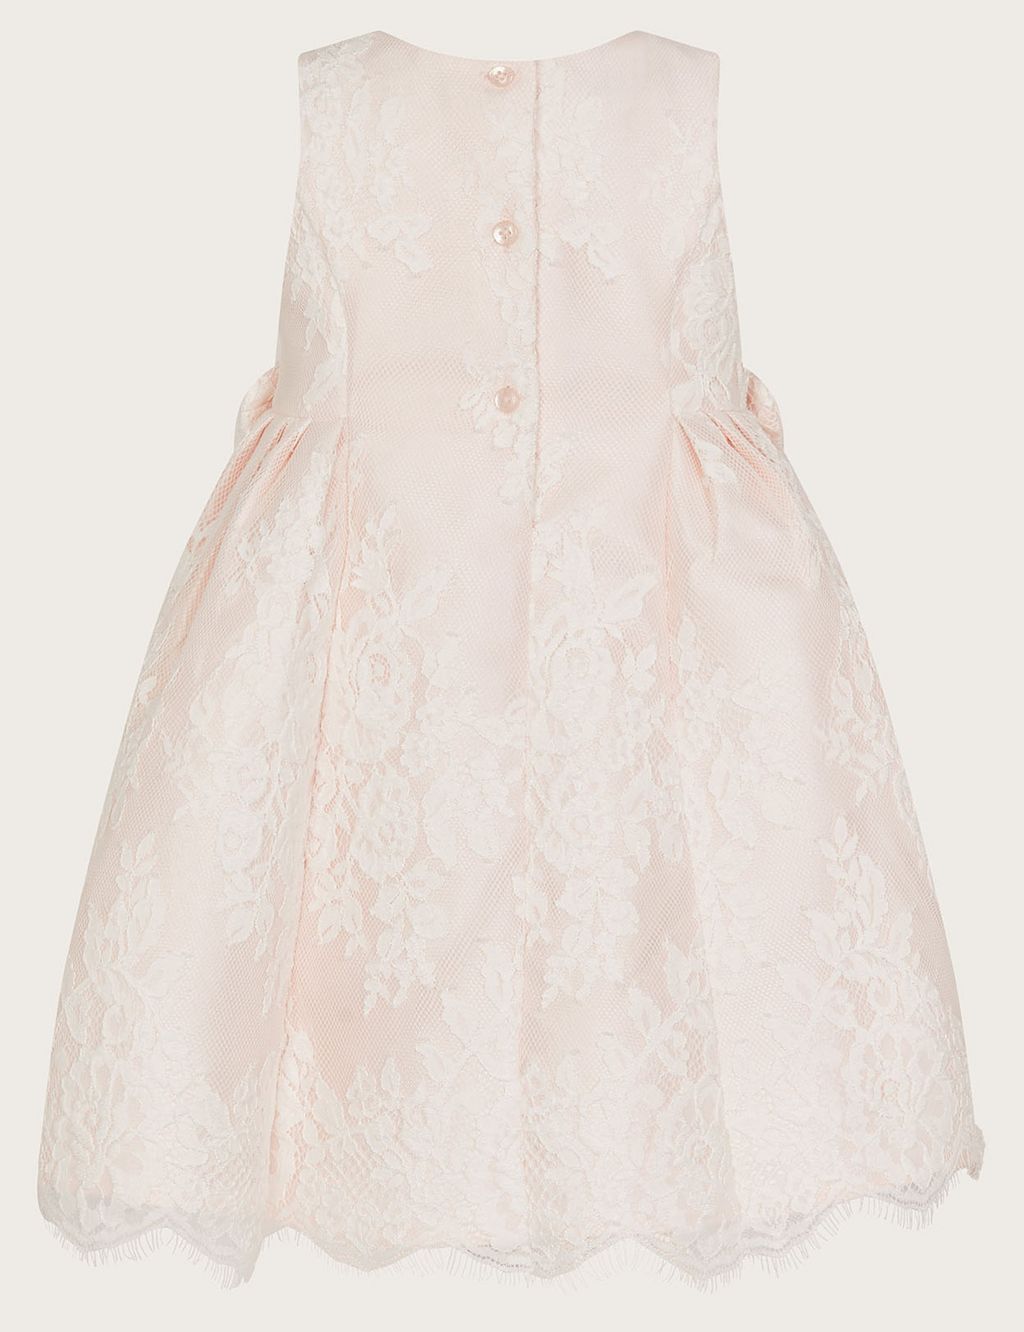 Floral Lace Occasion Dress (0-3 Yrs) image 2